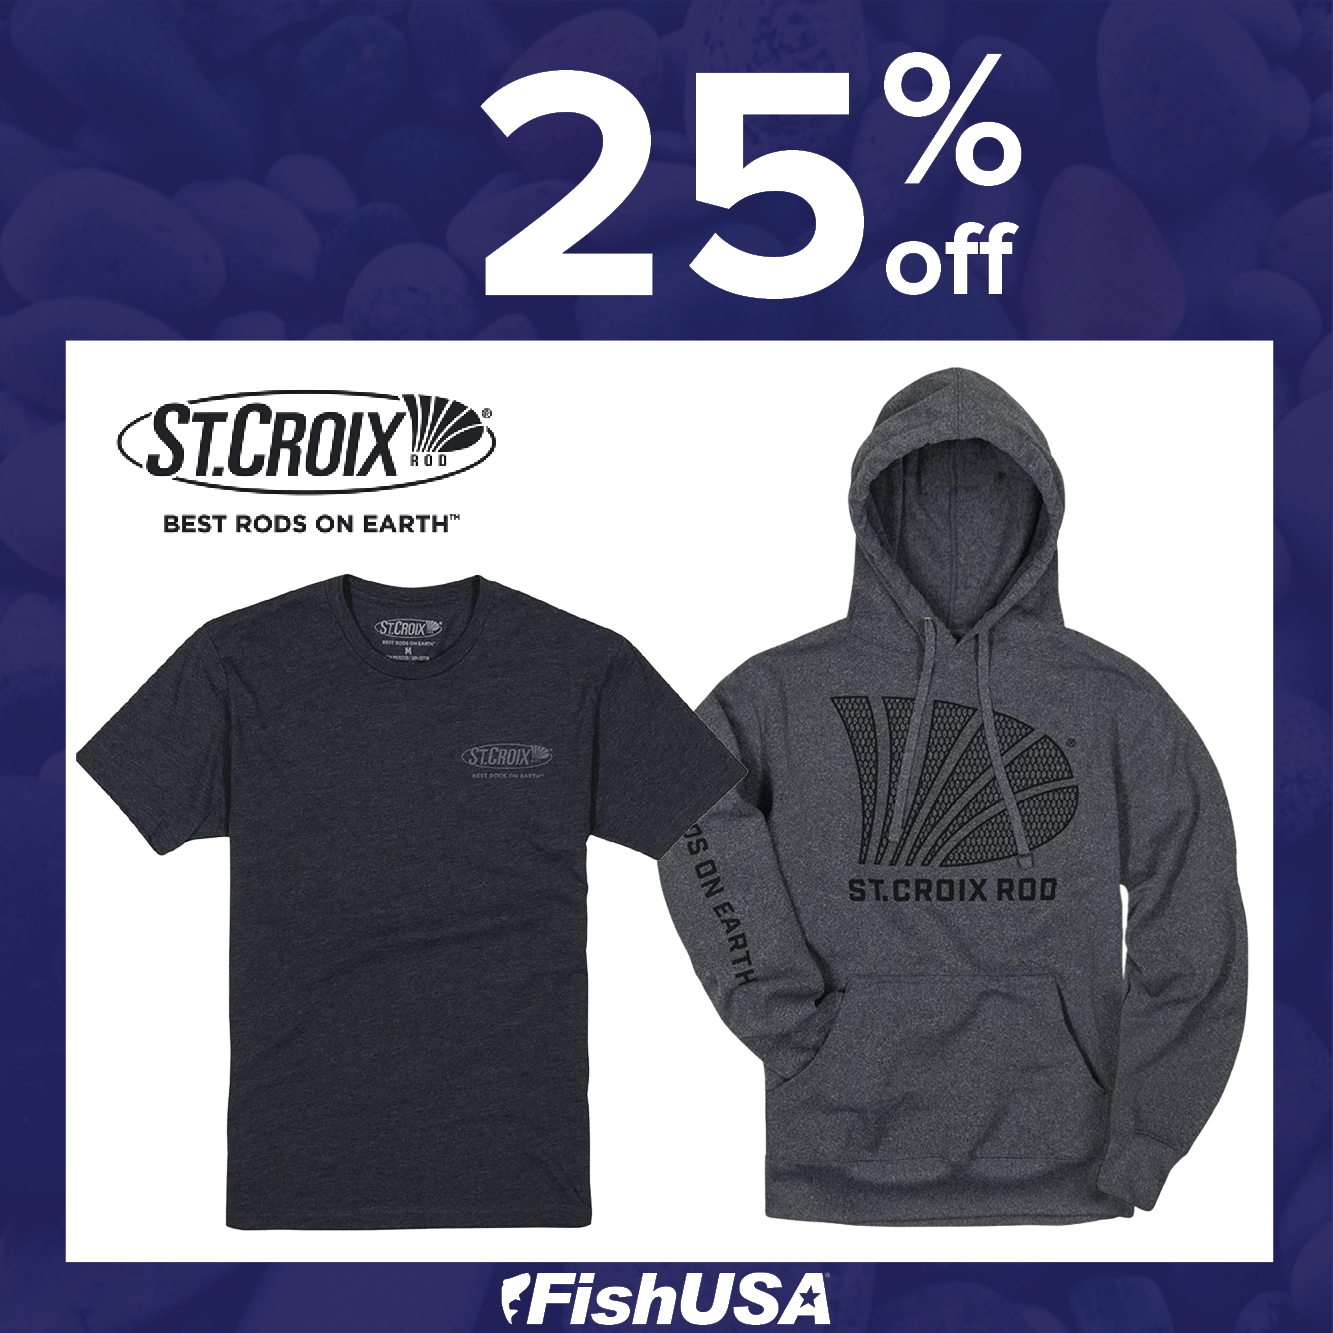 Save 25% on St. Croix Apparel